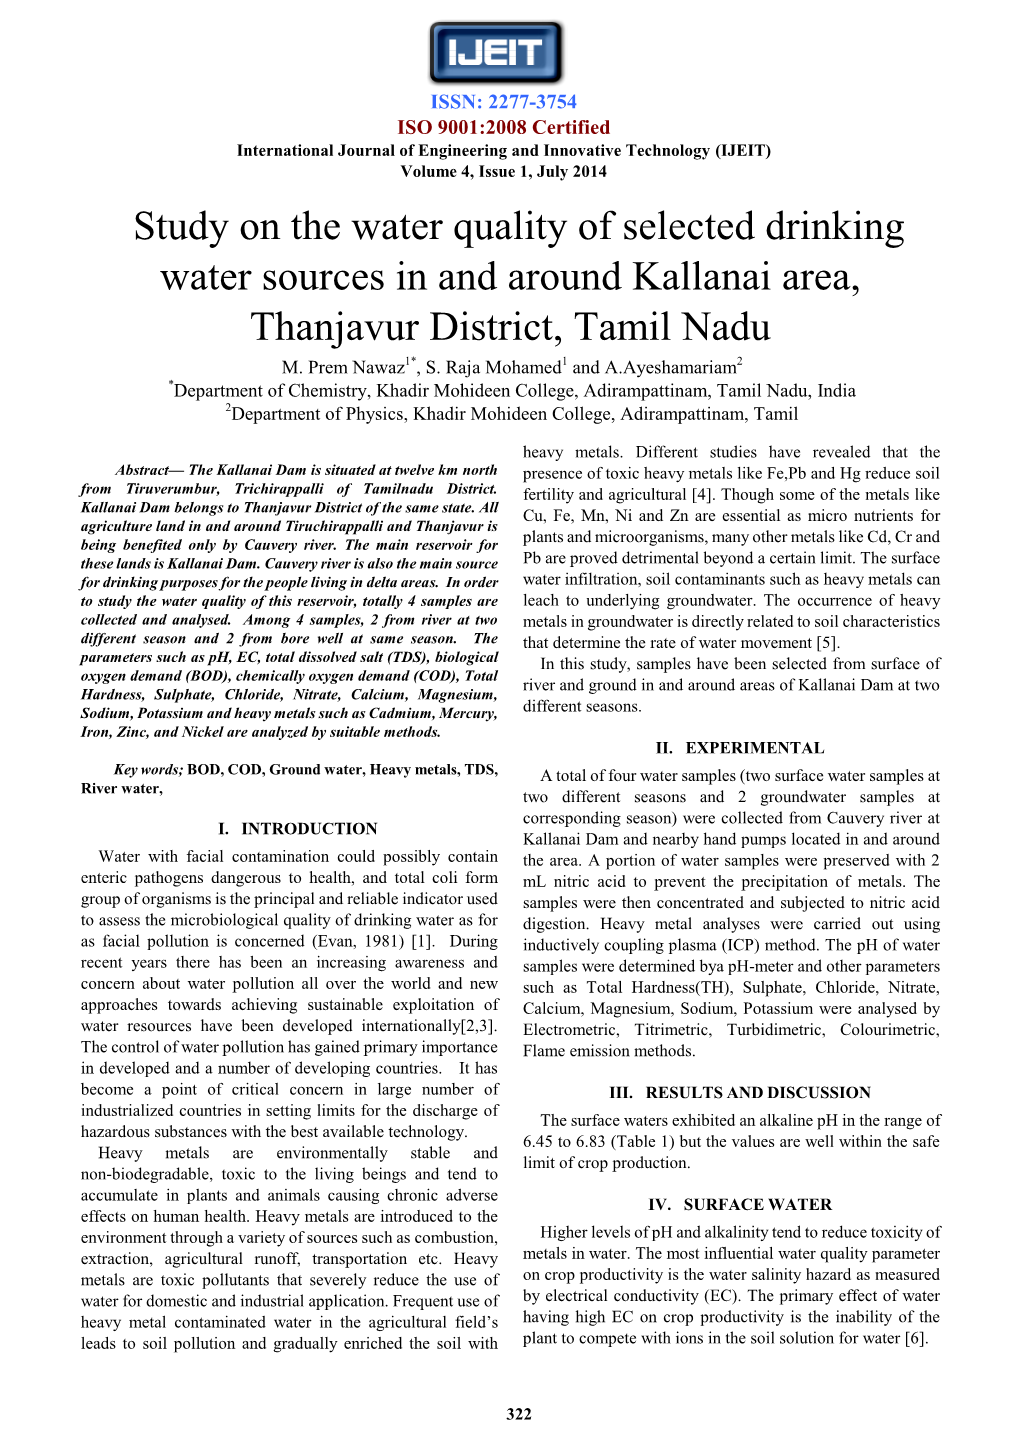 Study on the Water Quality of Selected Drinking Water Sources in and Around Kallanai Area, Thanjavur District, Tamil Nadu M